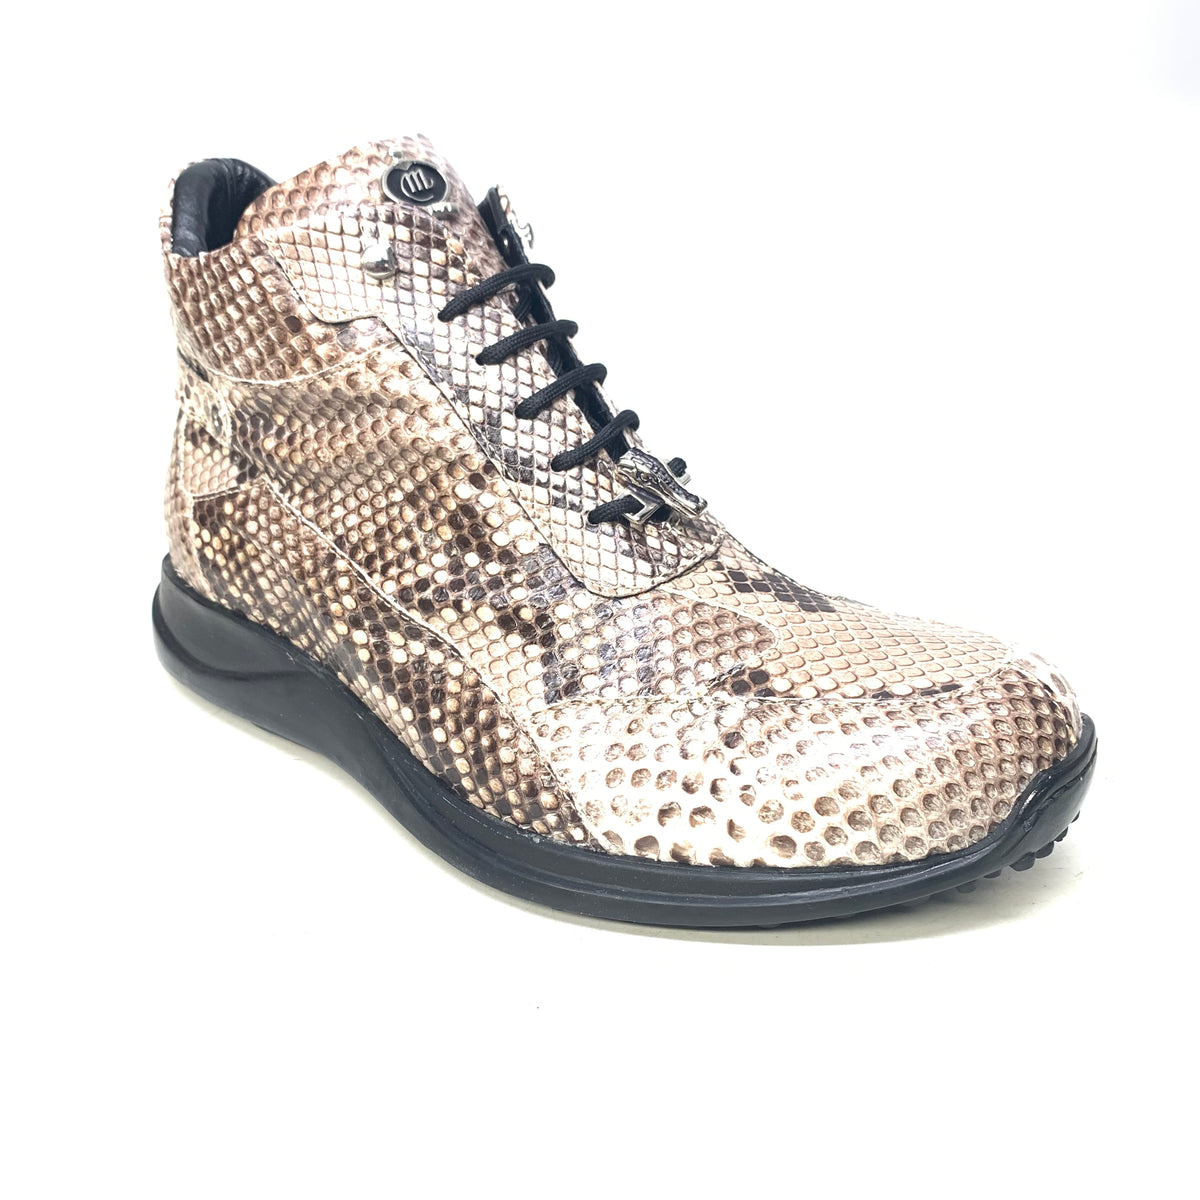 Mauri 8567 Natural Python Hightop Sneakers - Dudes Boutique